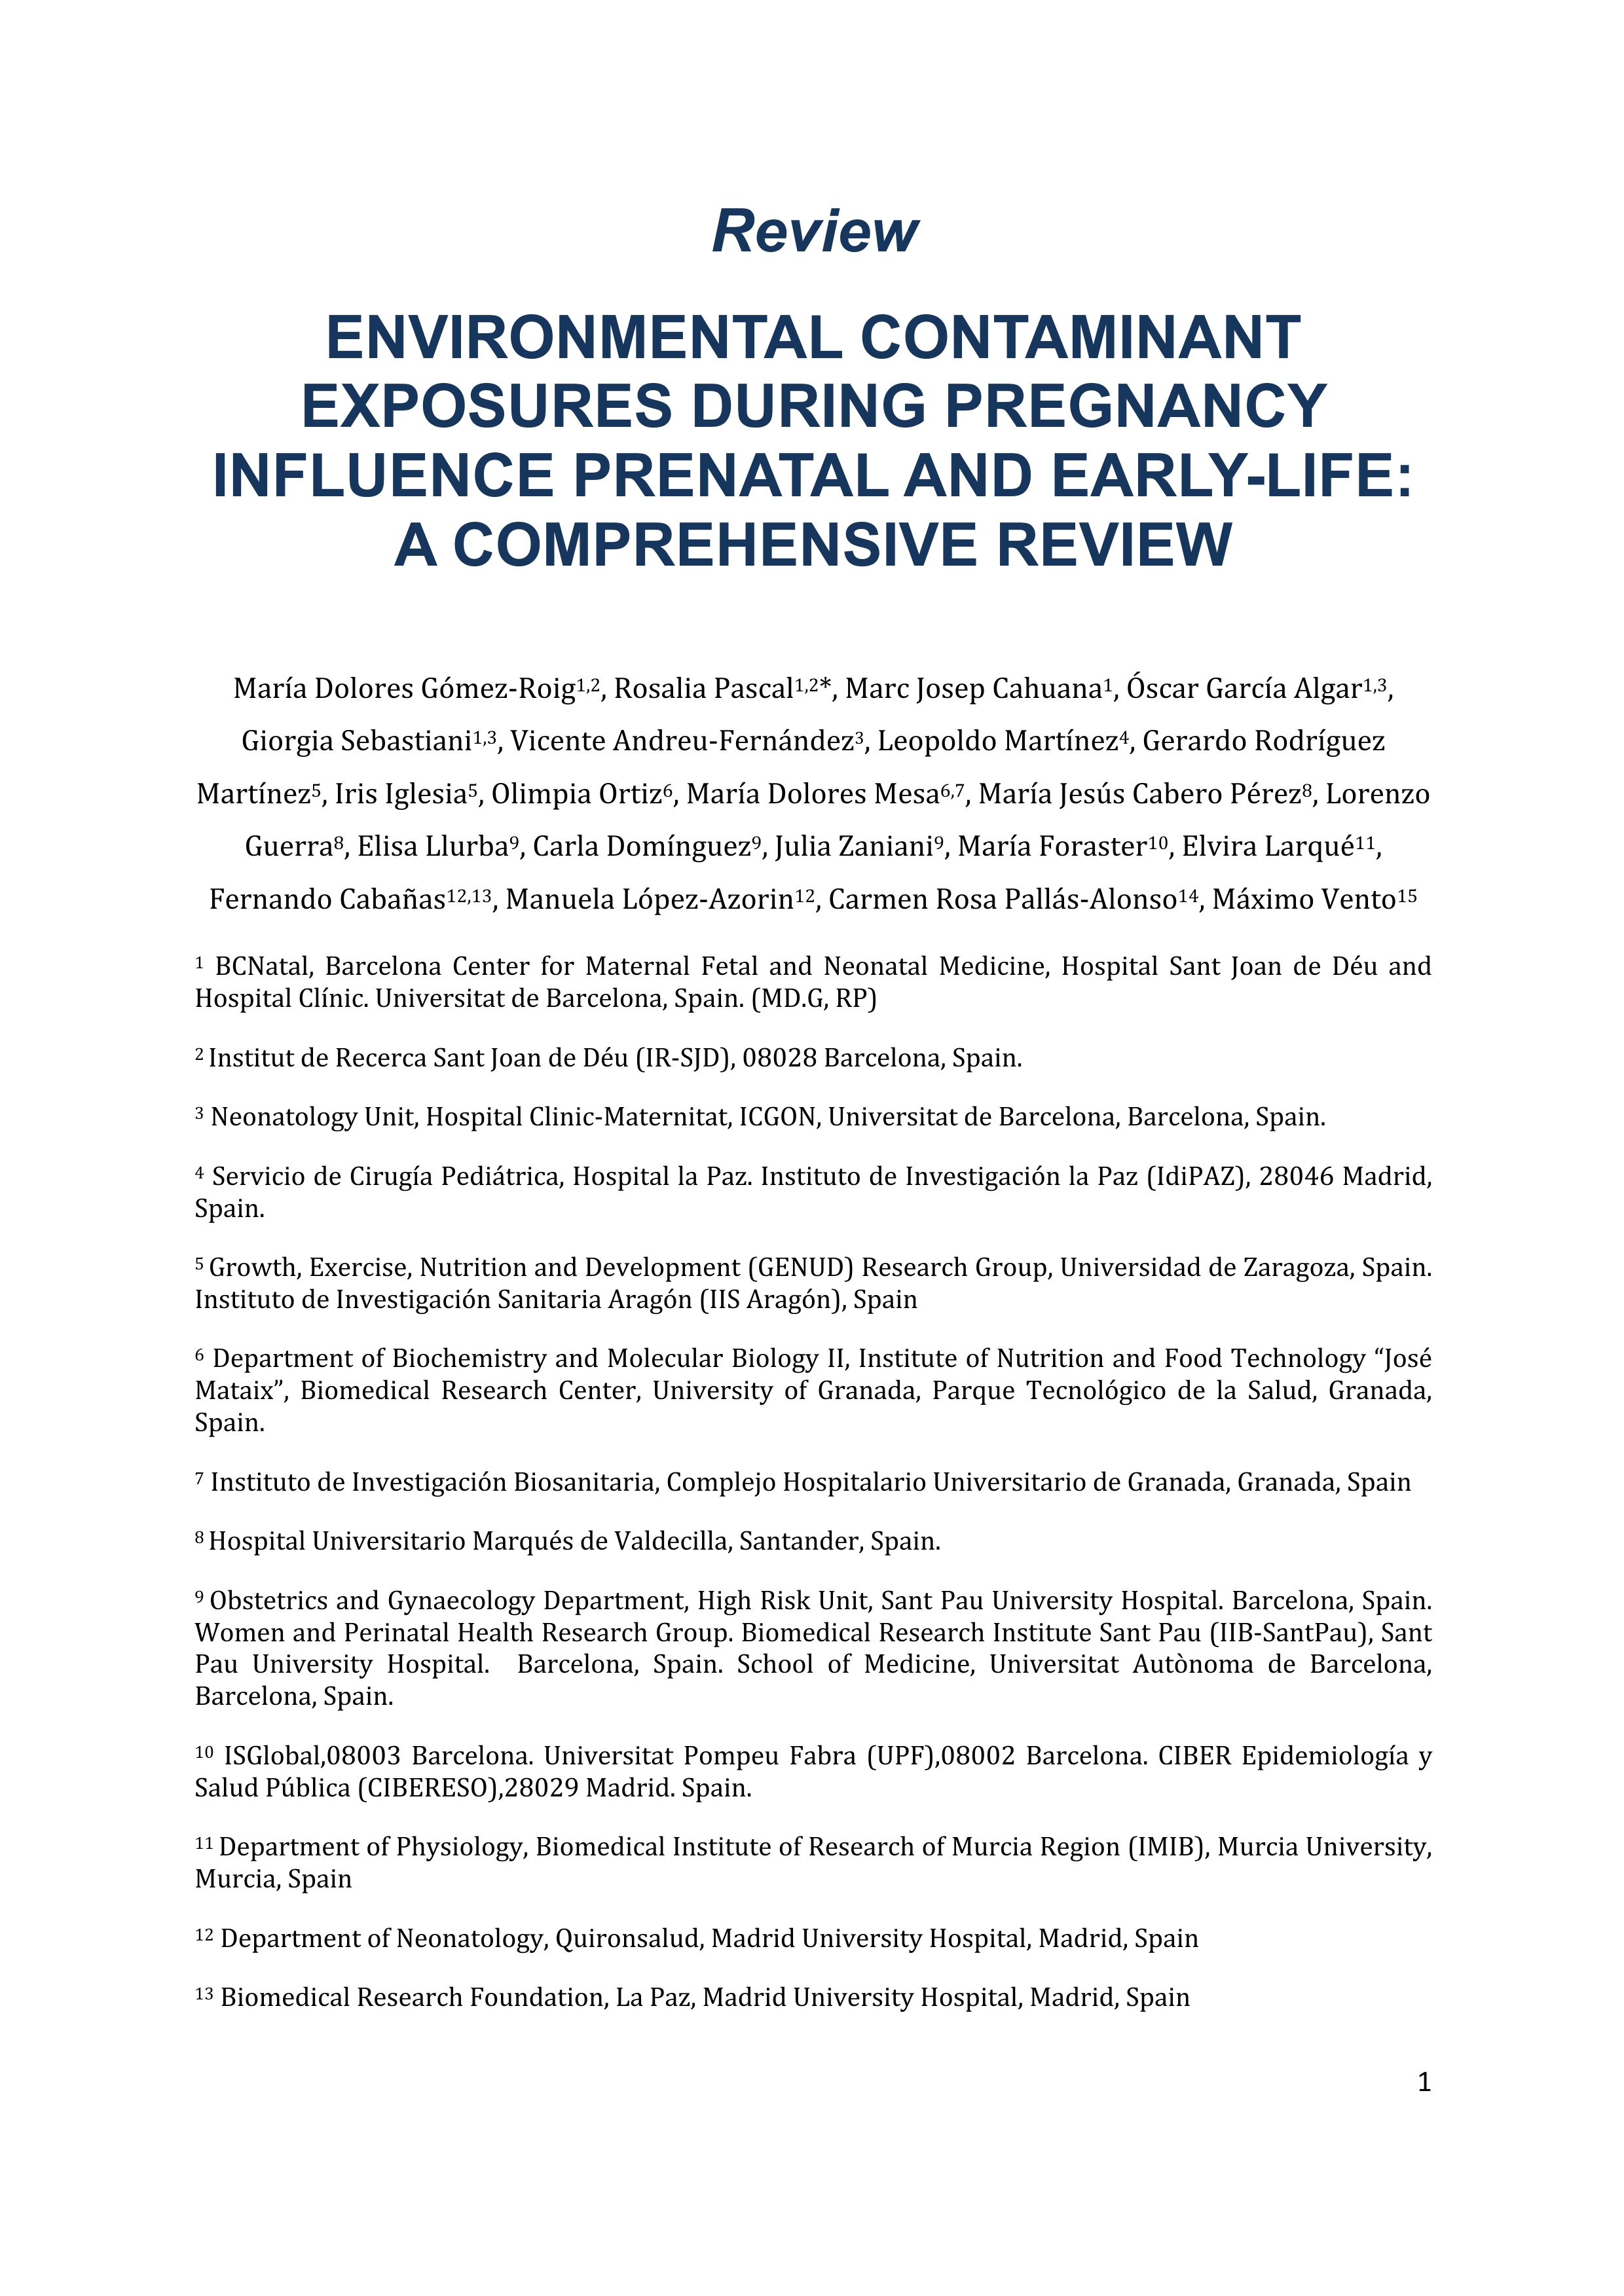 Environmental exposure during pregnancy: influence on prenatal development and early life: a comprehensive review